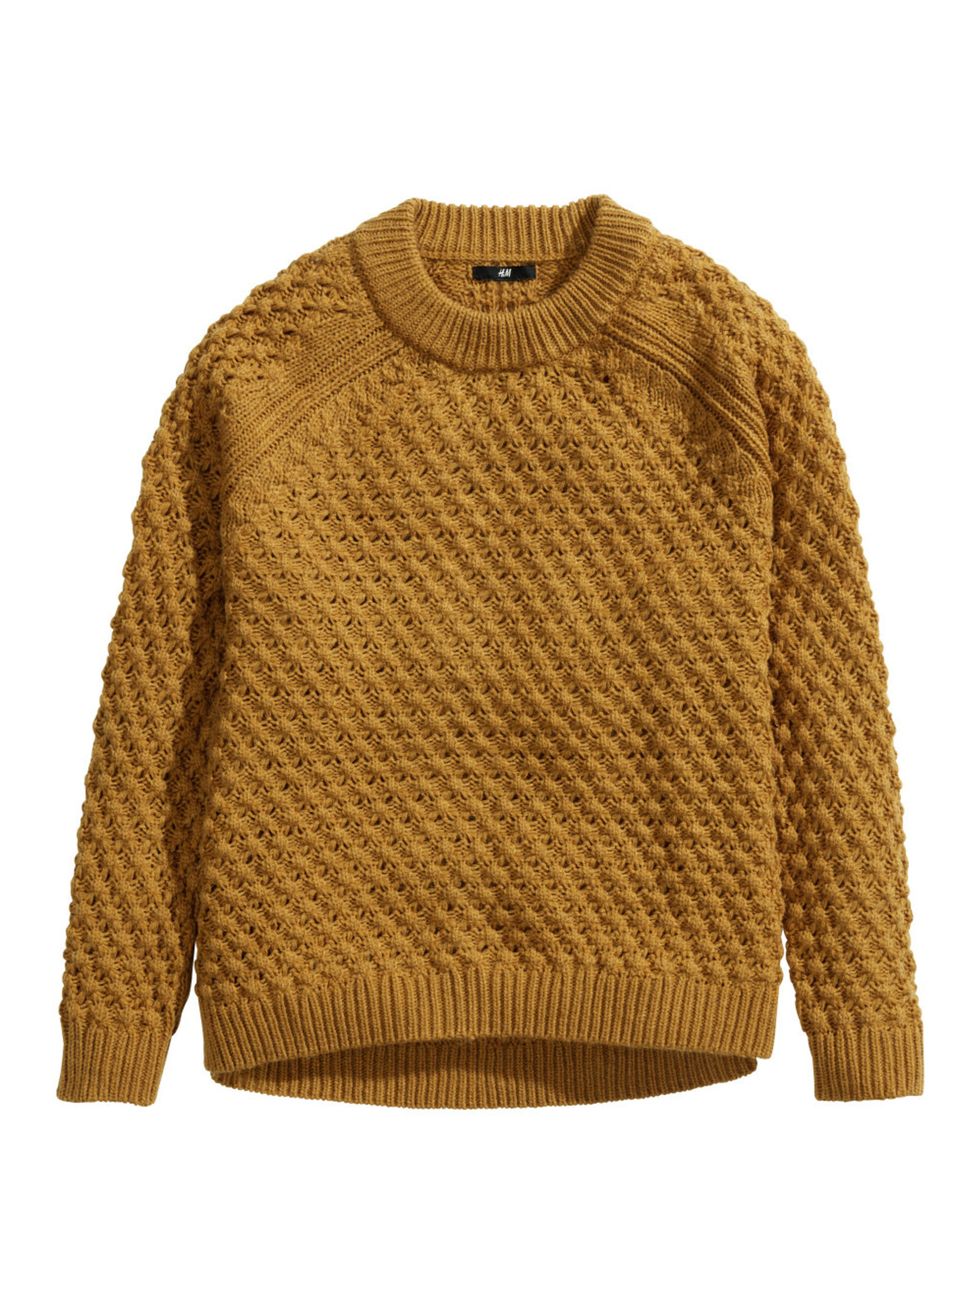 Sweater, Product, Brown, Yellow, Sleeve, Textile, Outerwear, Wool, Woolen, Light, 